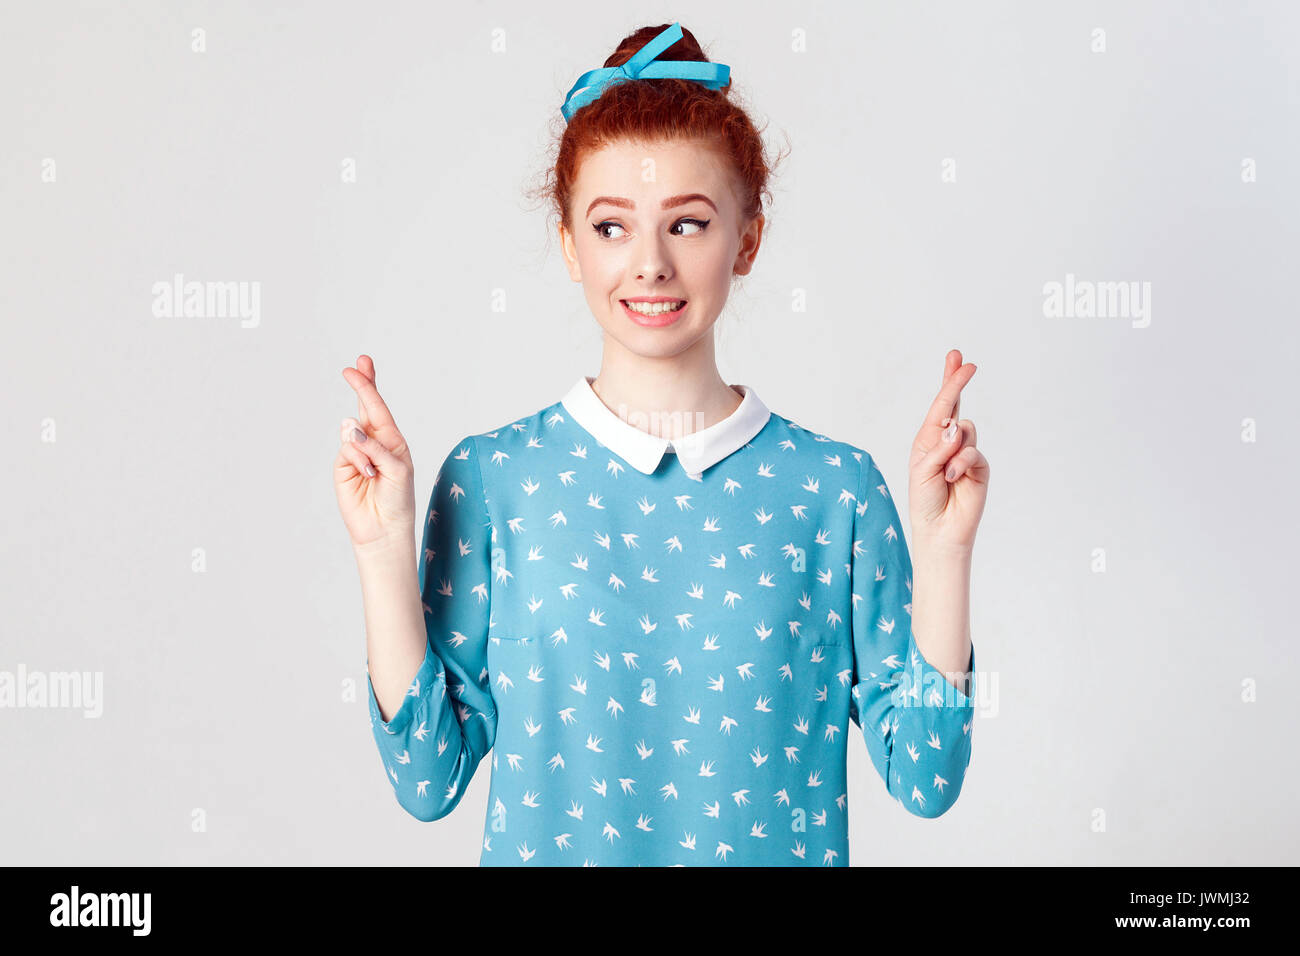 Body language. Human emotions and feelings. Superstitious teenager girl with ginger hair and pretty face crossing fingers for good luck, hoping her wi Stock Photo